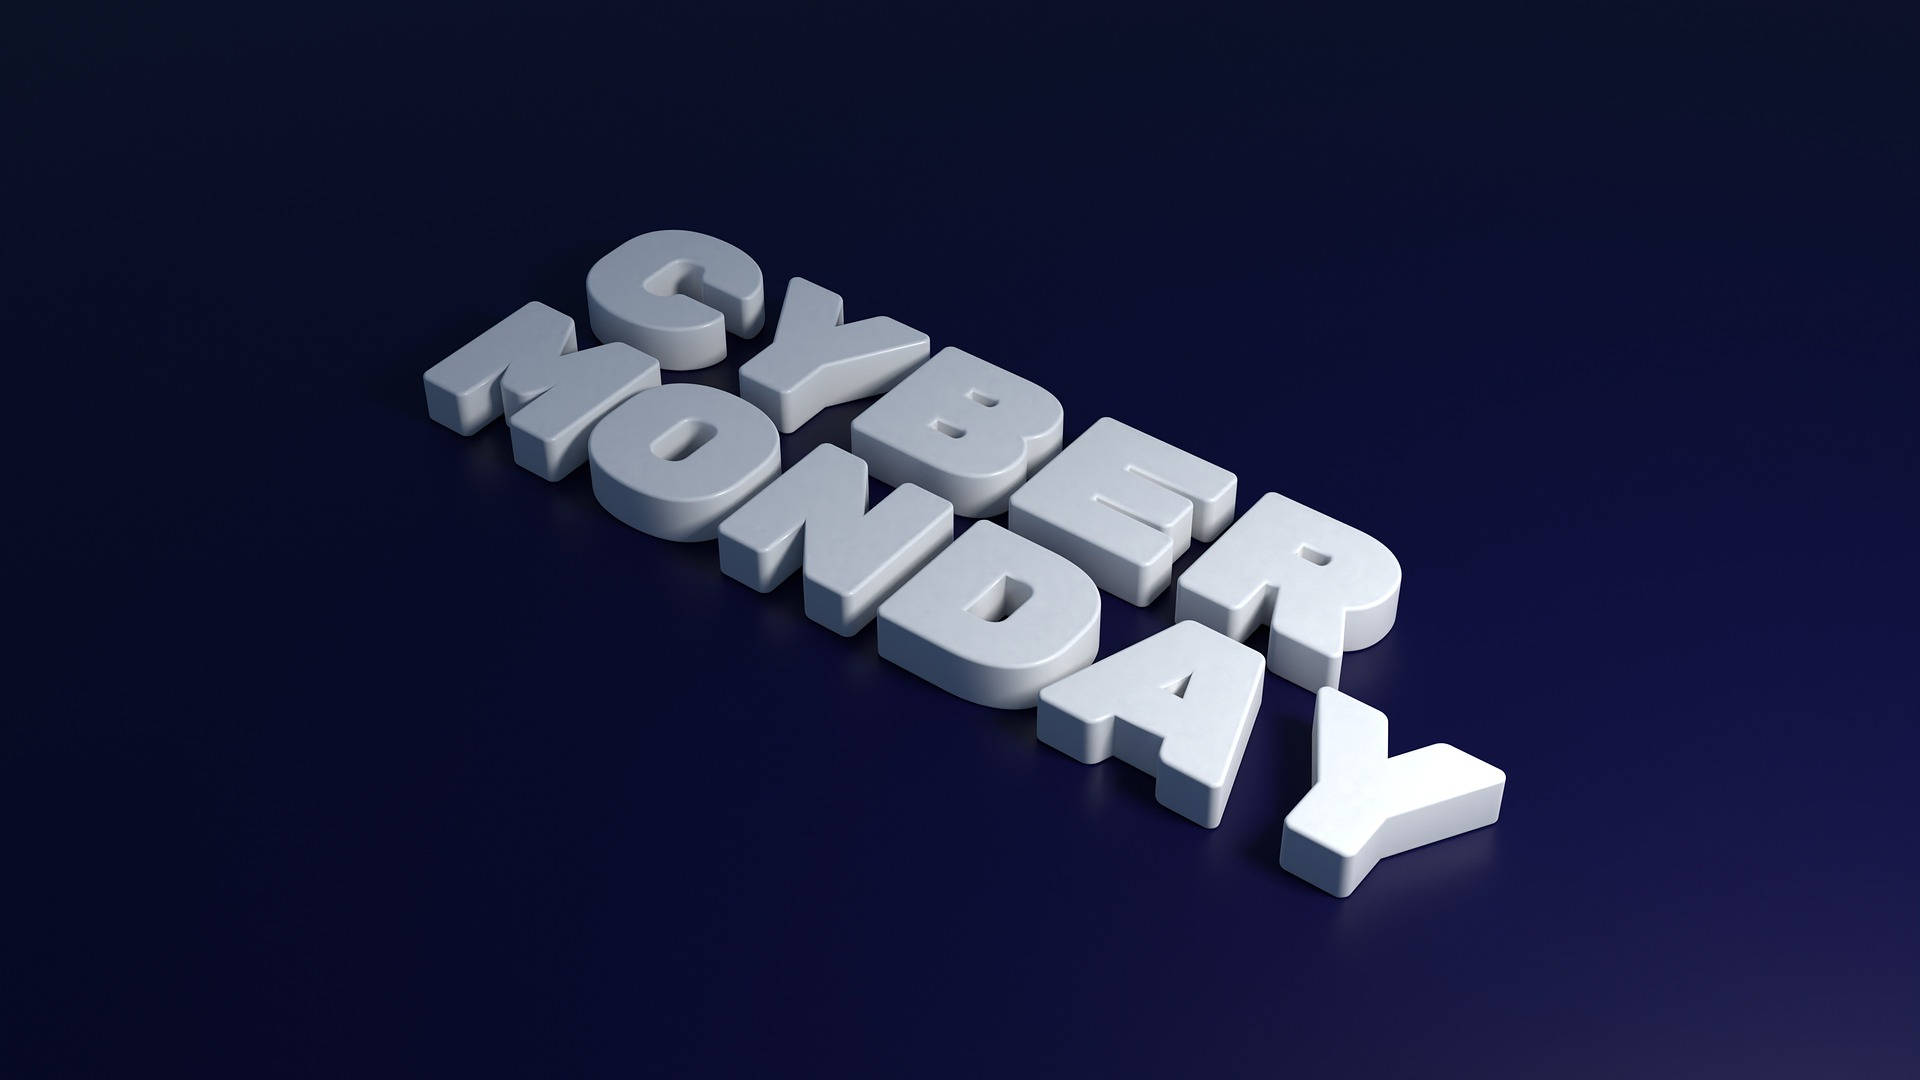 Cyber Monday Business Concept Wallpaper